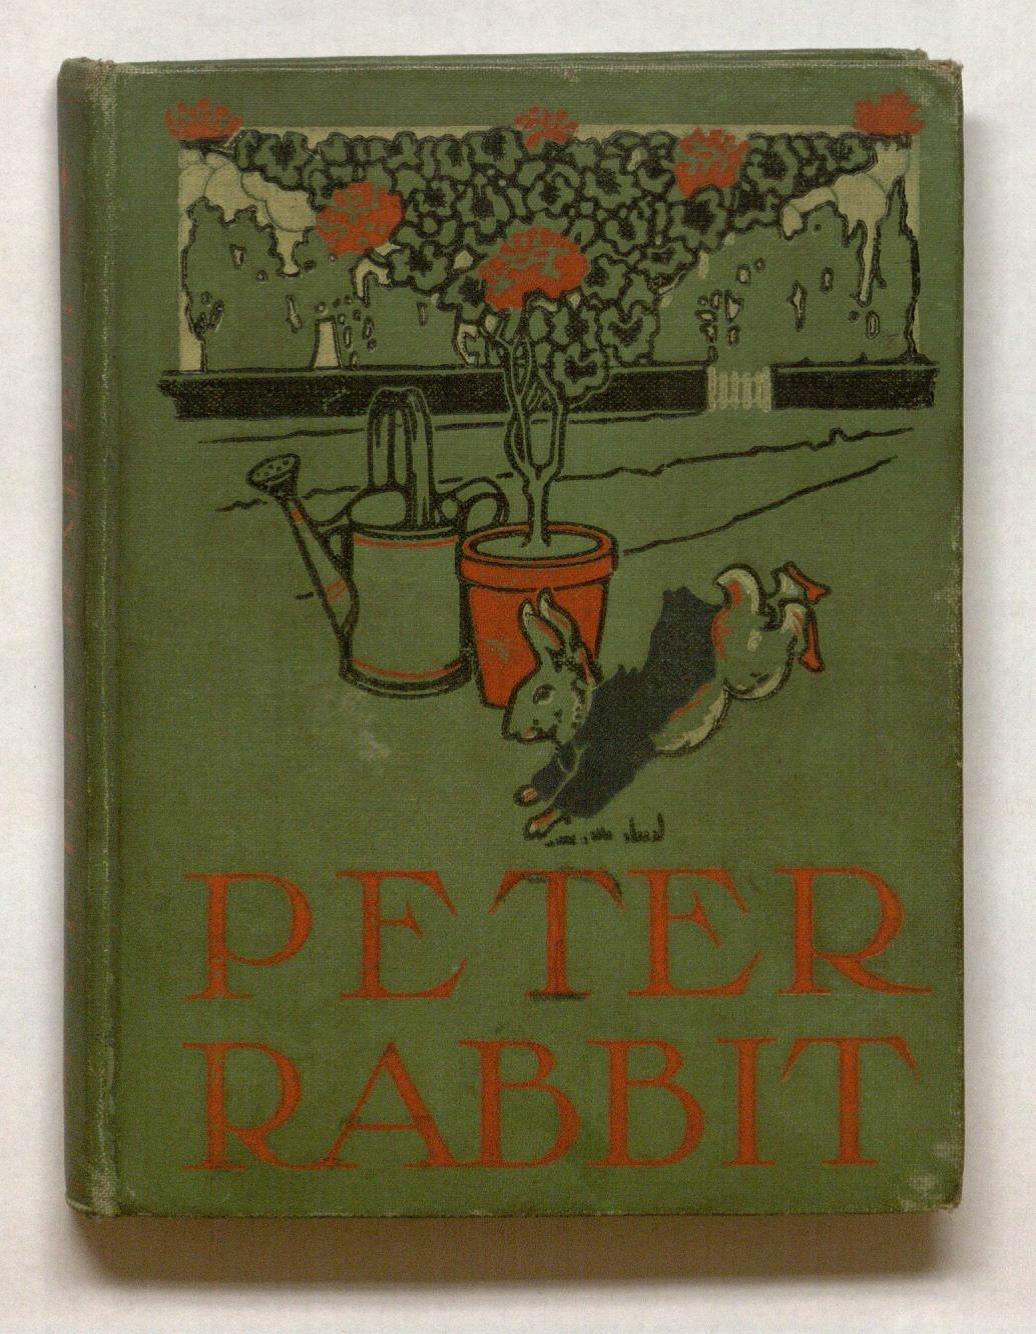 Front cover of Beatrix Potter’s "The Tale of Peter Rabbit" published in Philadelphia by H. Altemus in 1904.